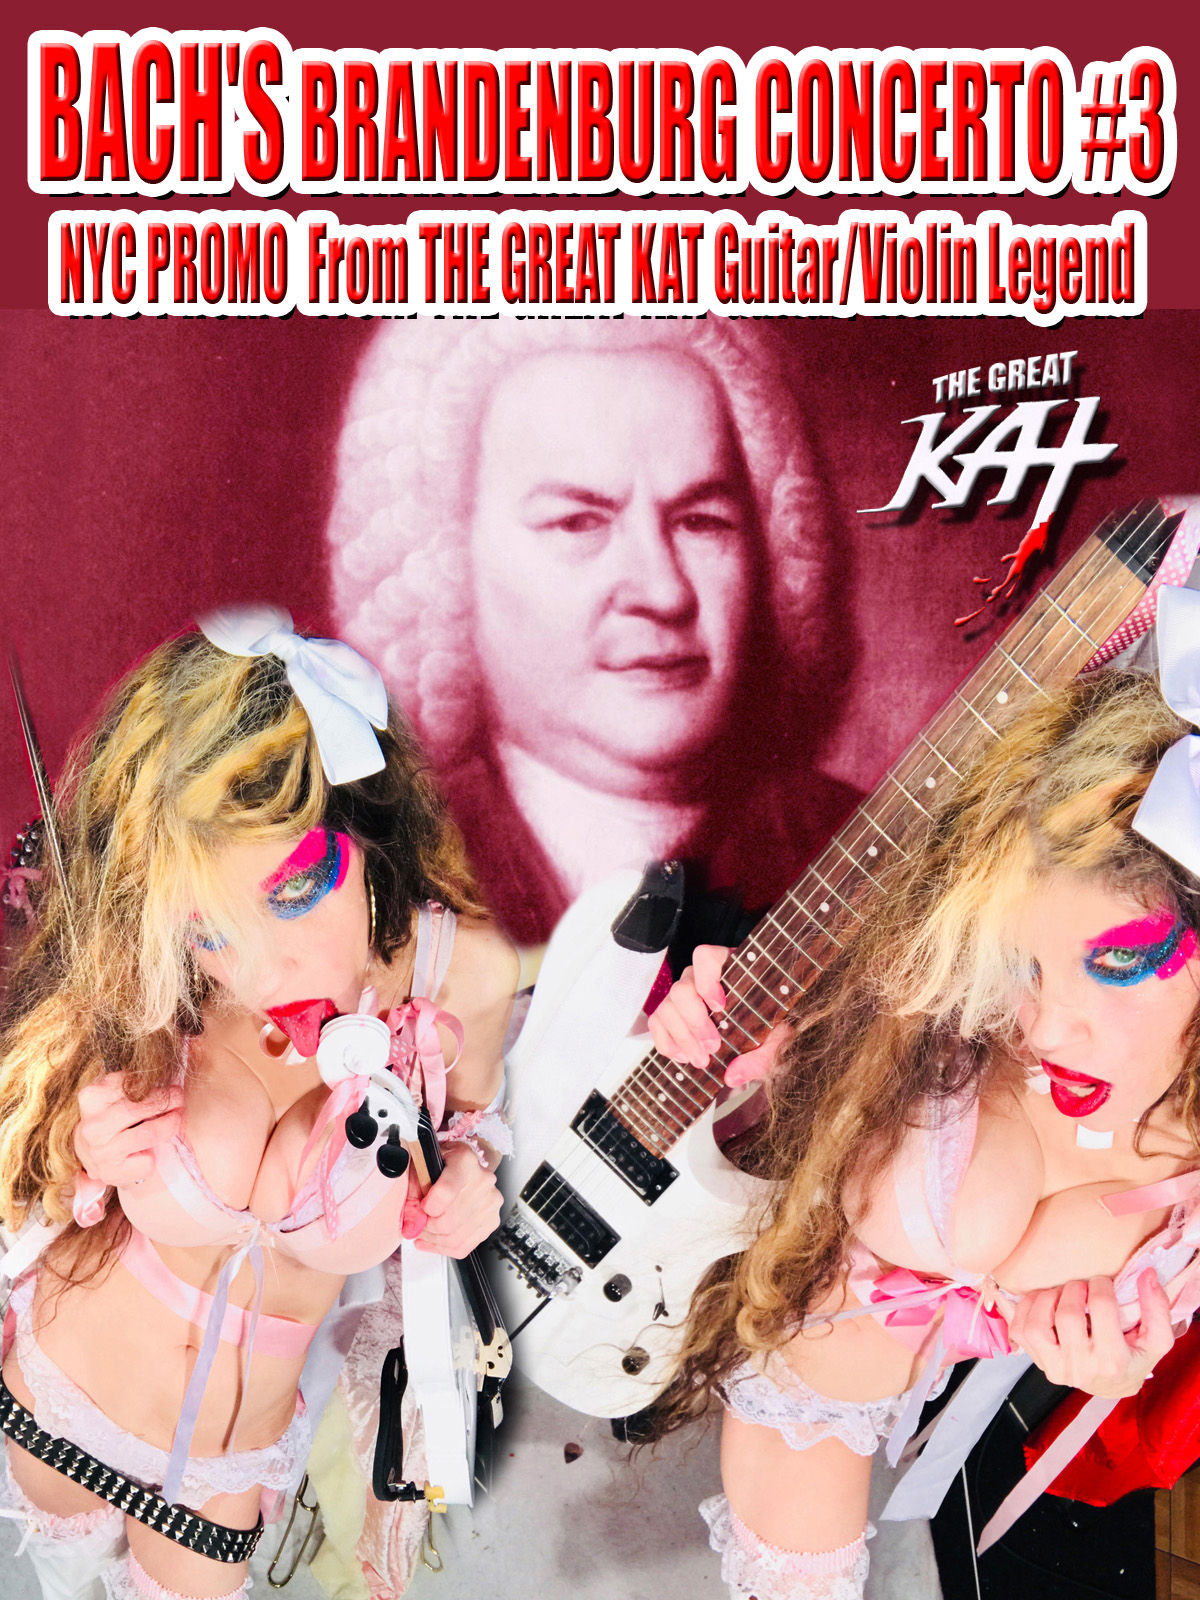 BACH'S BRANDENBURG CONCERTO #3 NYC PROMO From THE GREAT KAT Guitar/Violin Legend